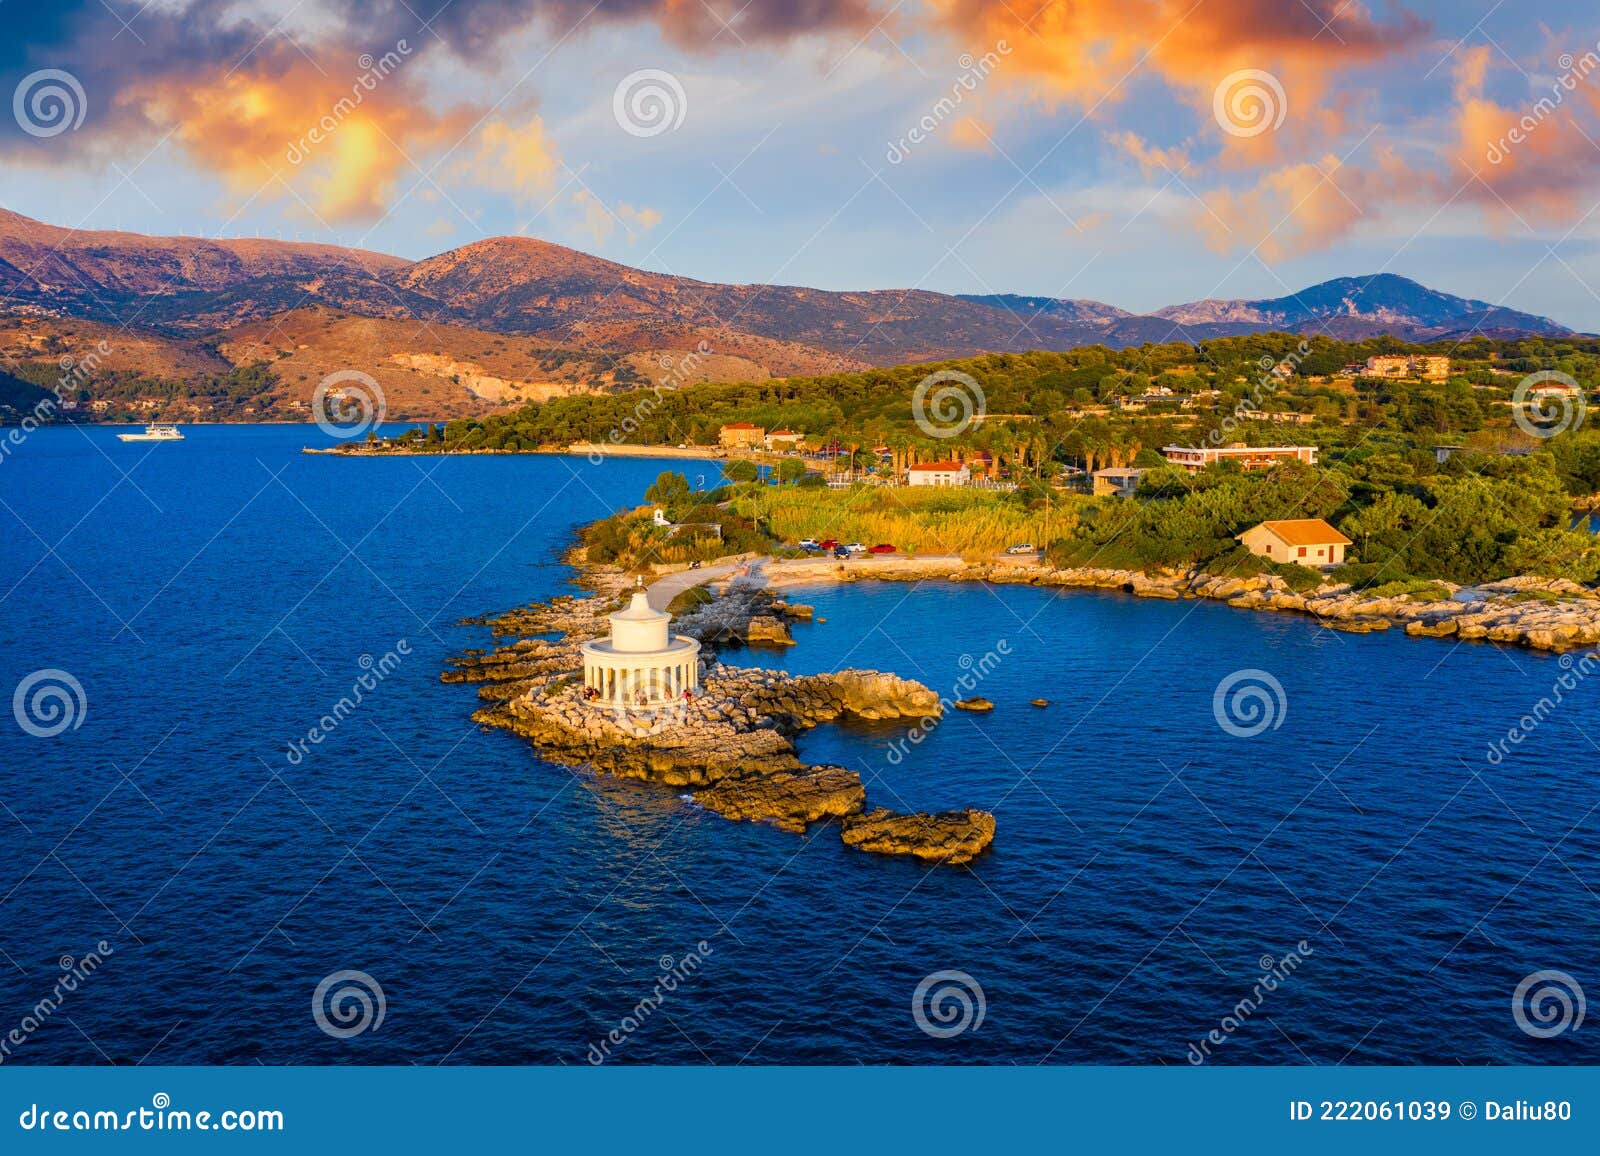 aerial view of lighthouse of saint theodore in lassi, argostoli, kefalonia island in greece. saint theodore lighthouse in